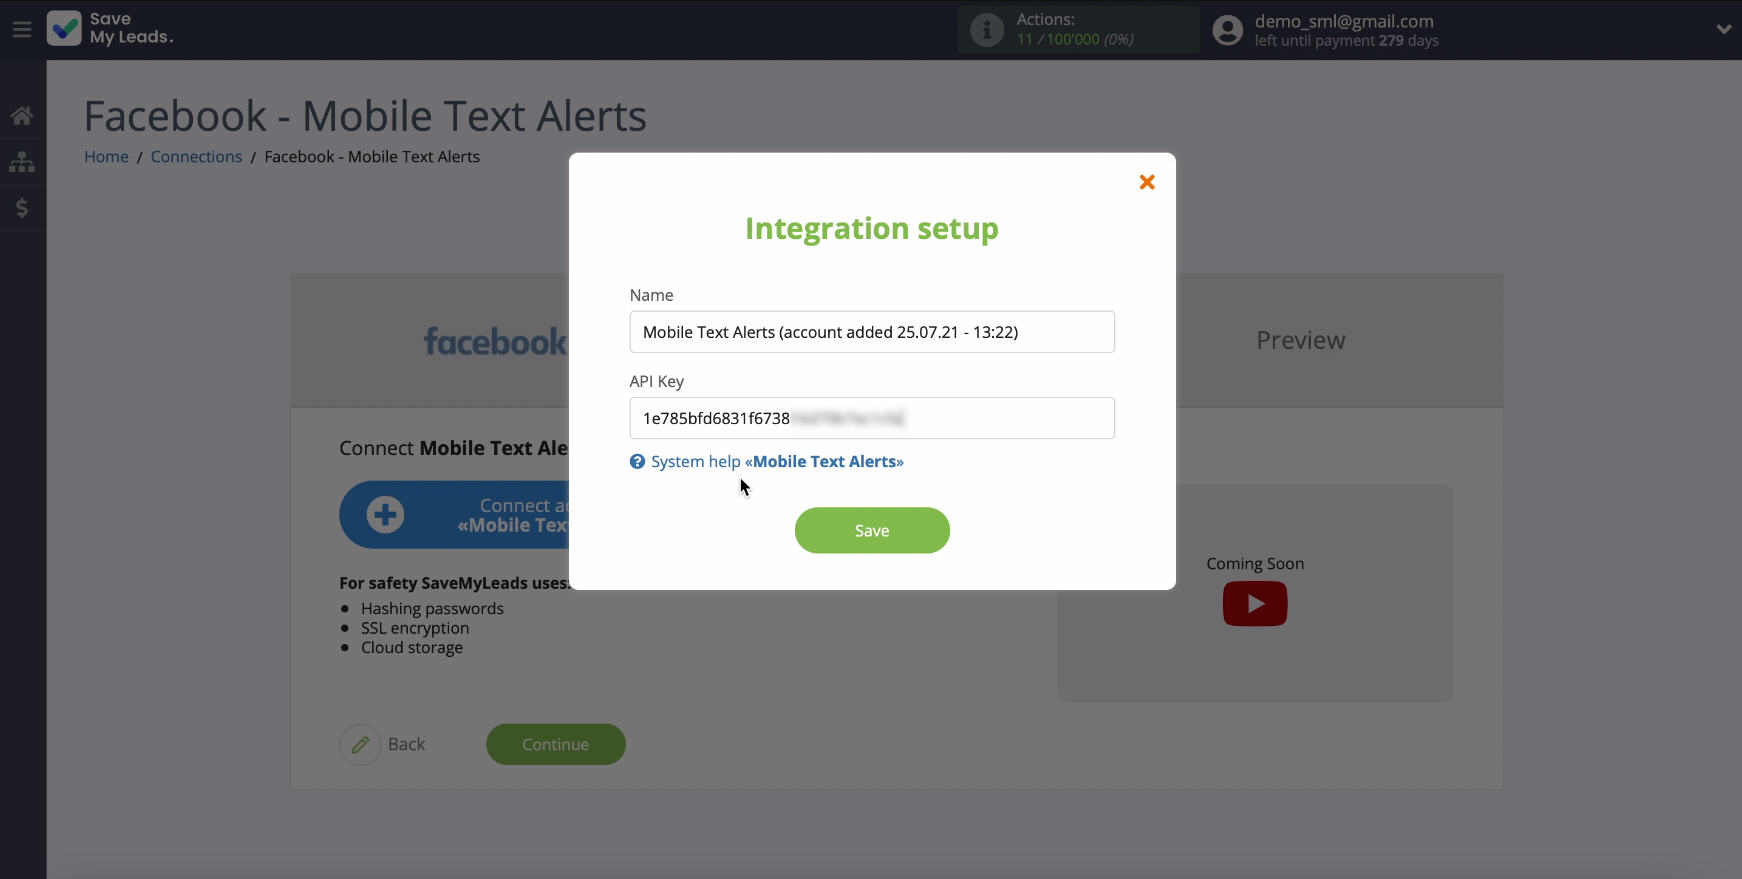 Facebook and Mobile Text Alerts integration | Paste the API Key